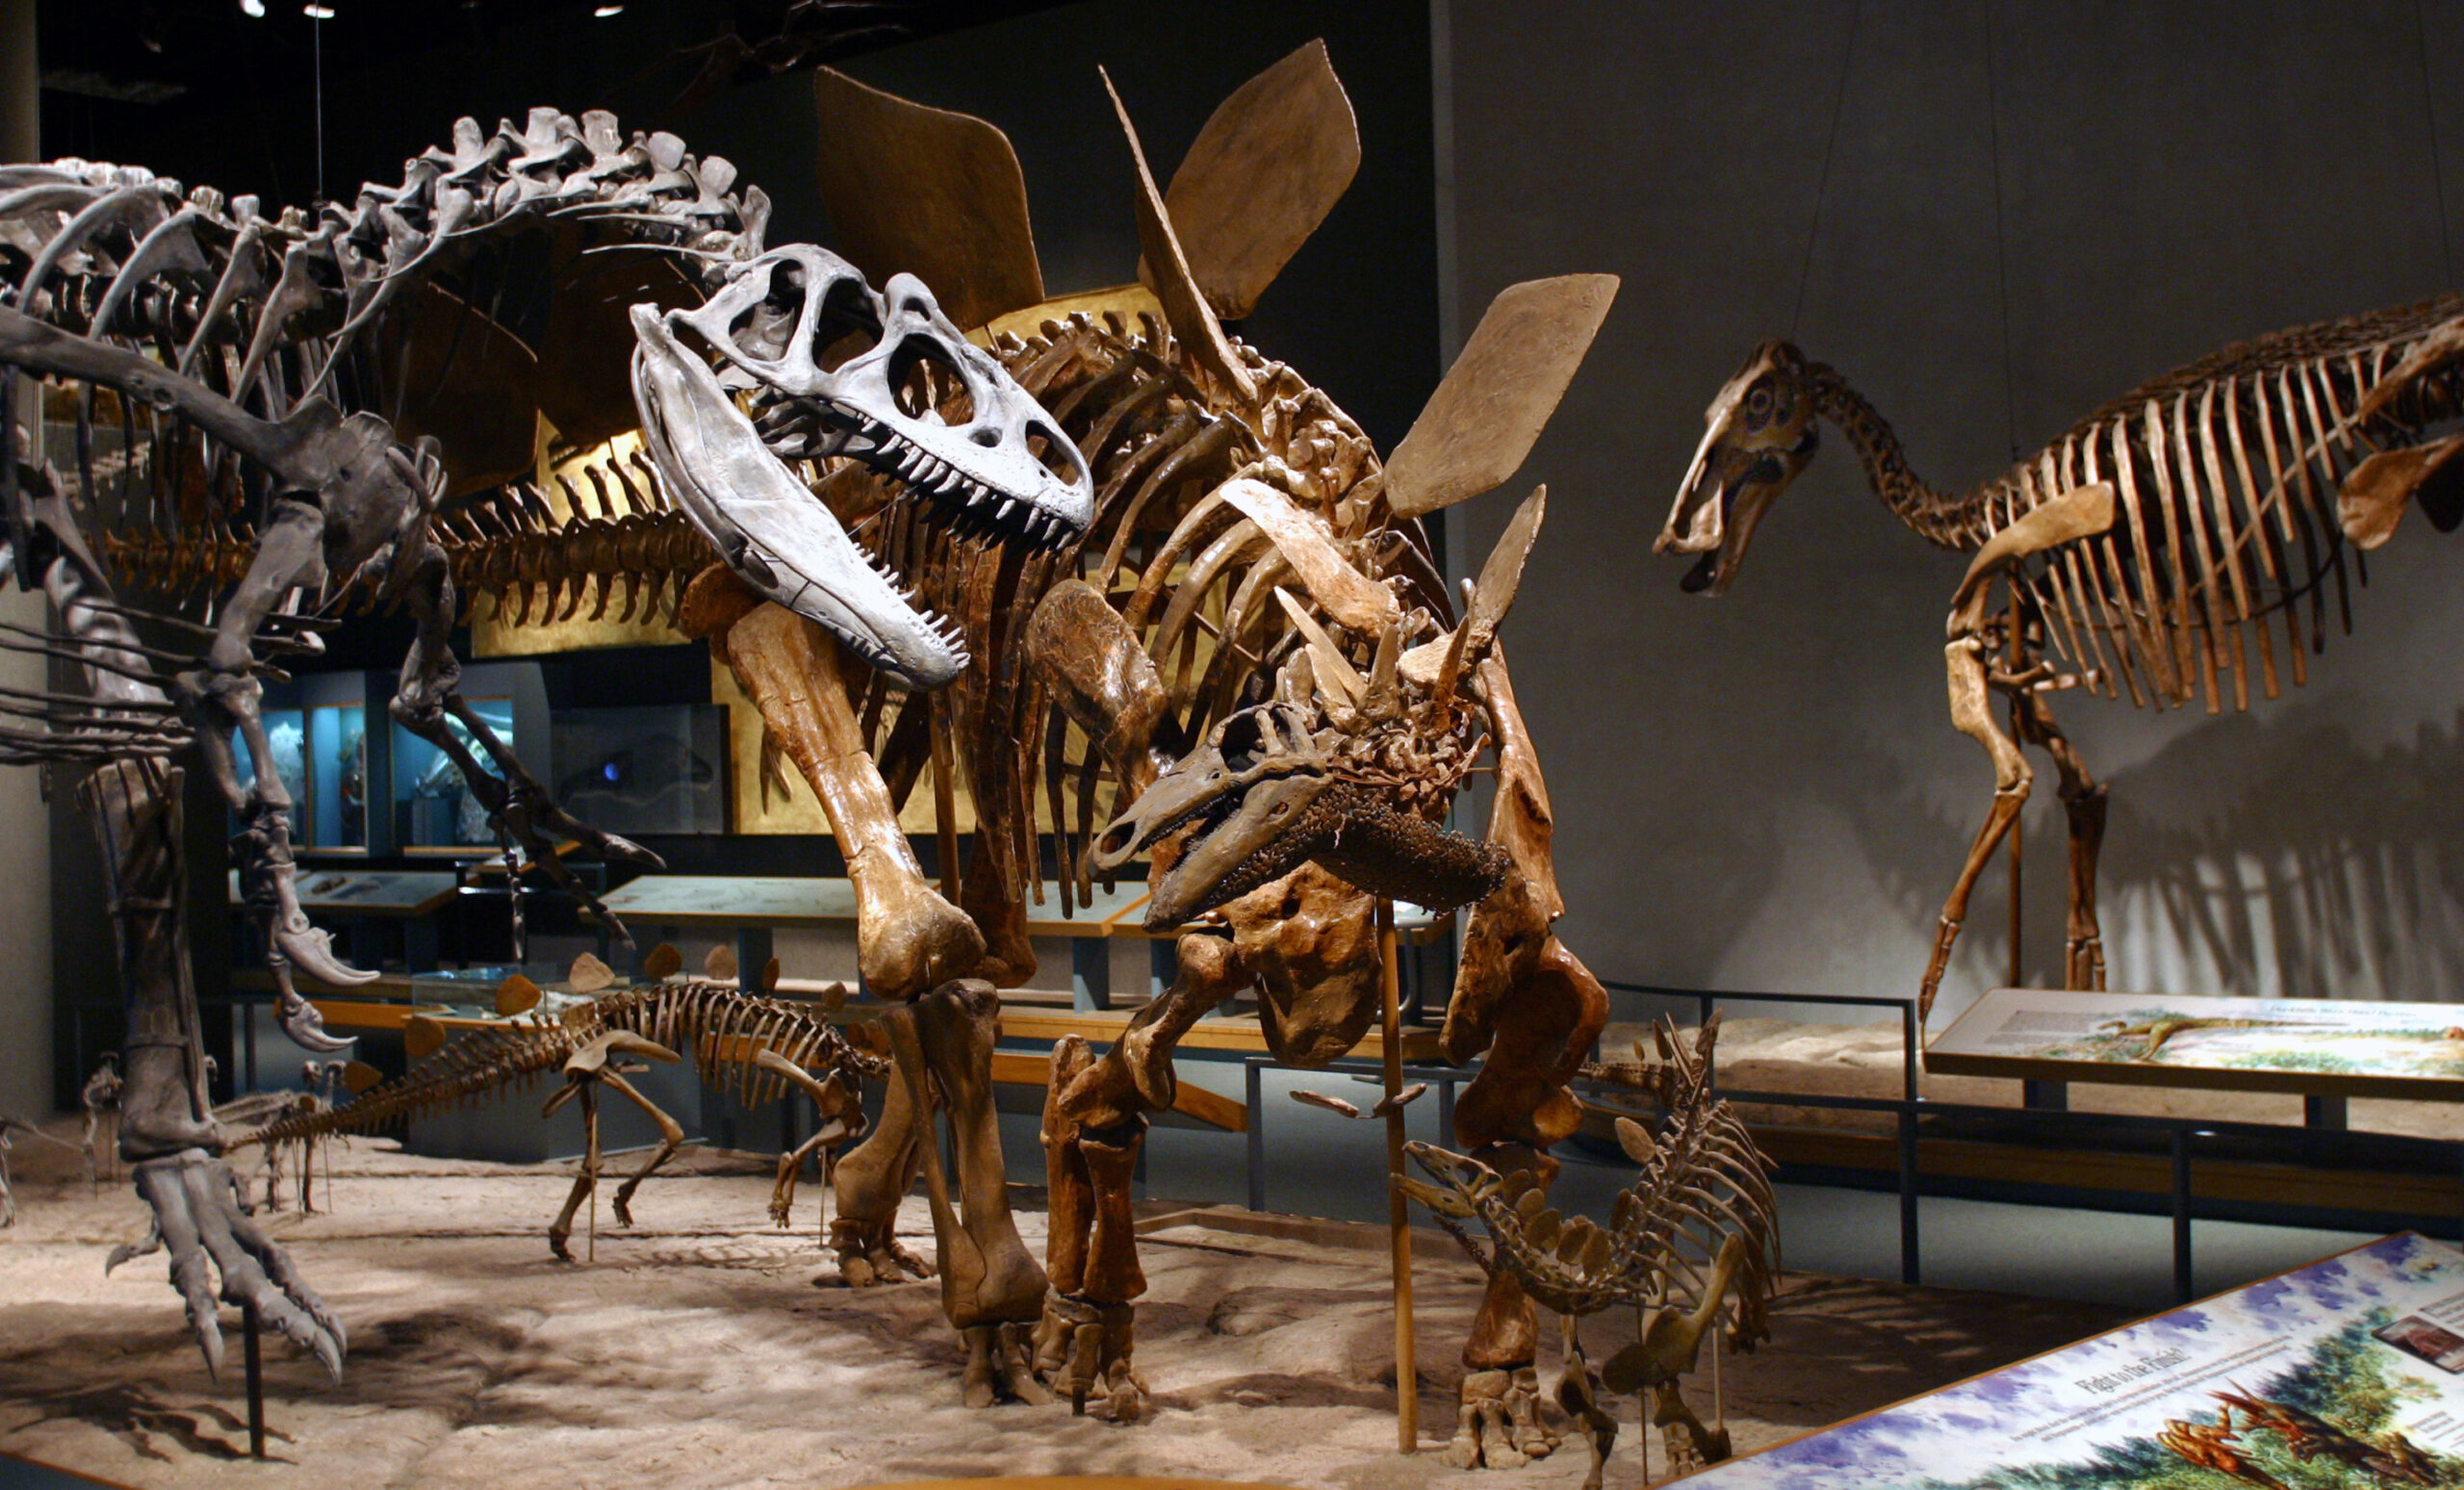 98.5 KYGO Reports on Denver Museum of Nature & Science’s Revamped Exhibit